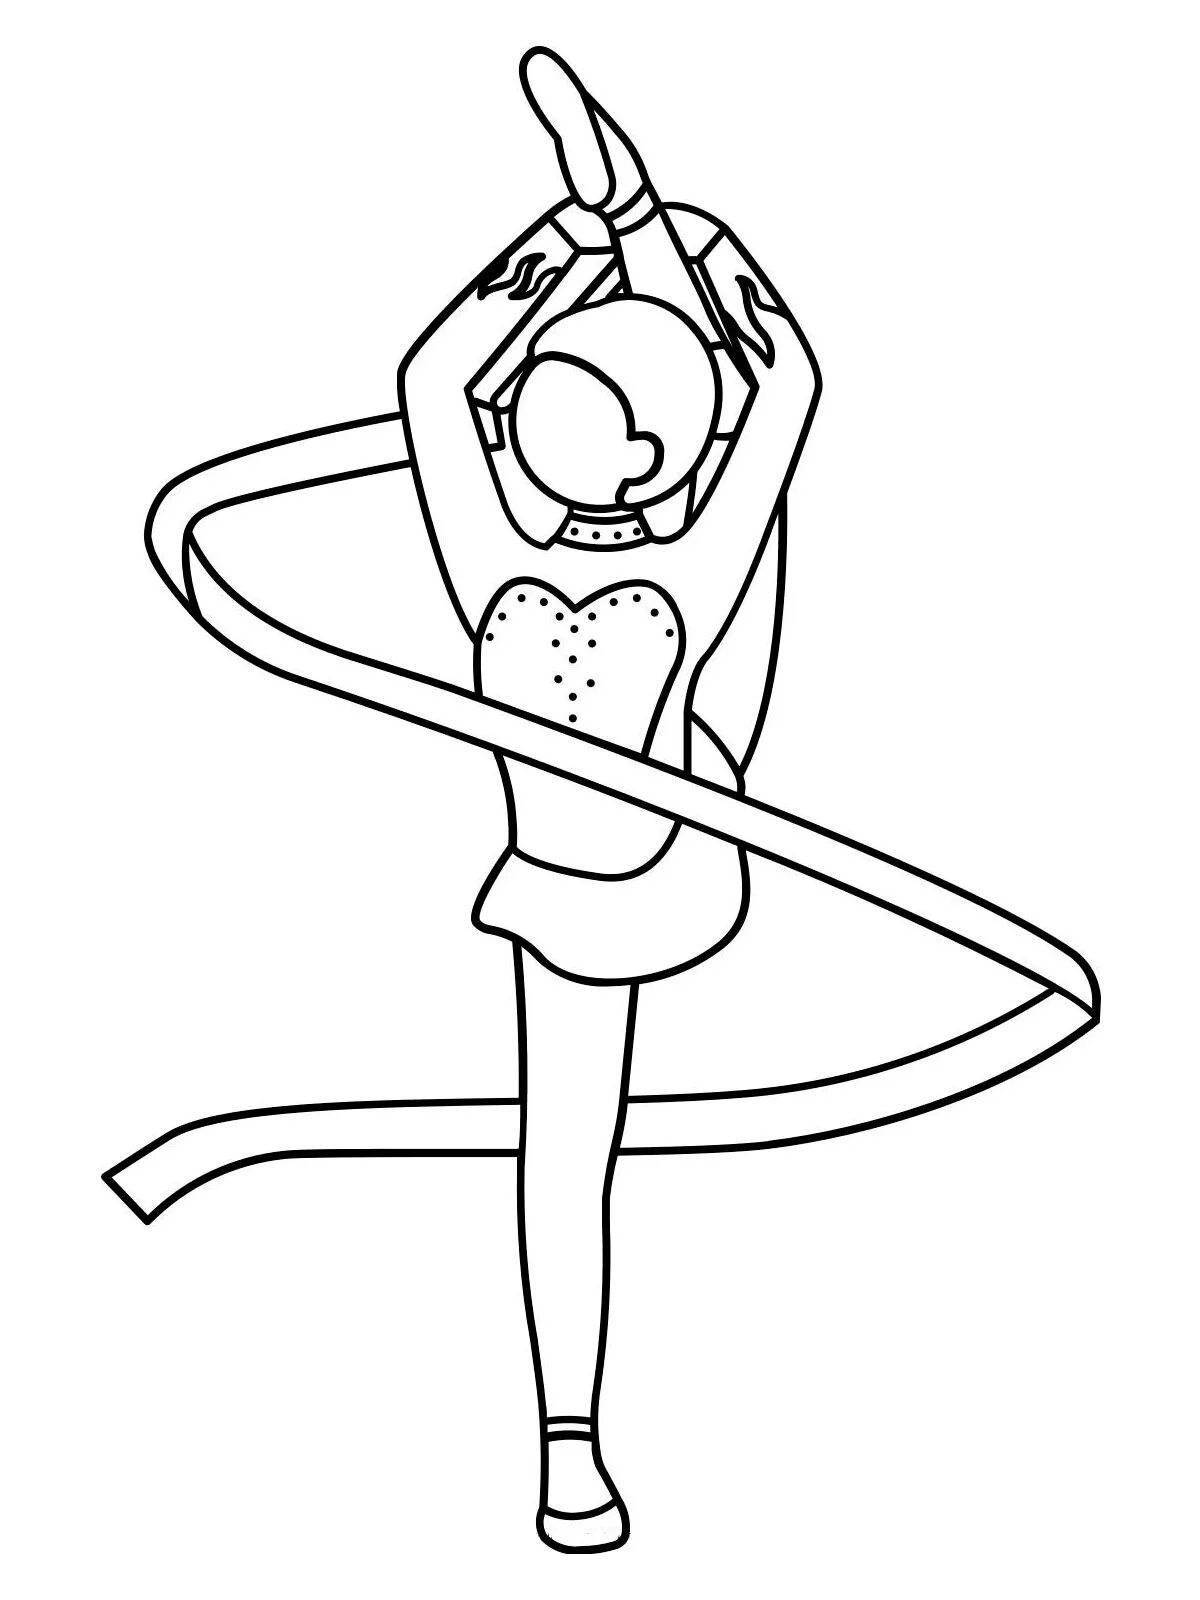 Cheerful split leg coloring page